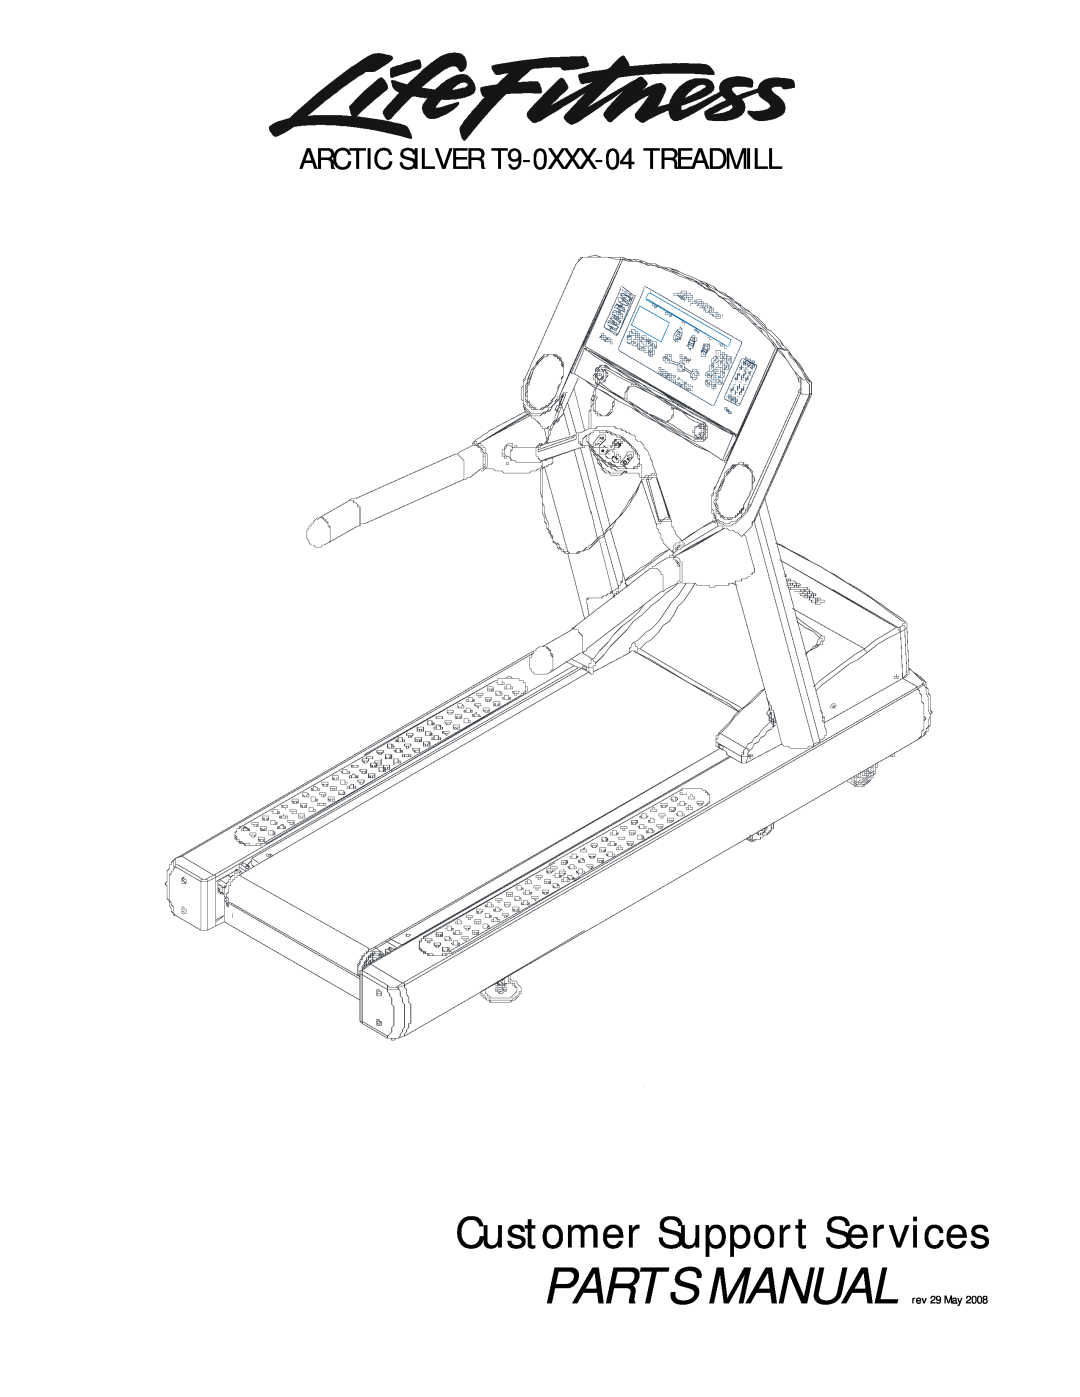 Life Fitness manual Customer Support Services, ARCTIC SILVER T9-0XXX-04 TREADMILL, PARTS MANUAL rev 29 May 